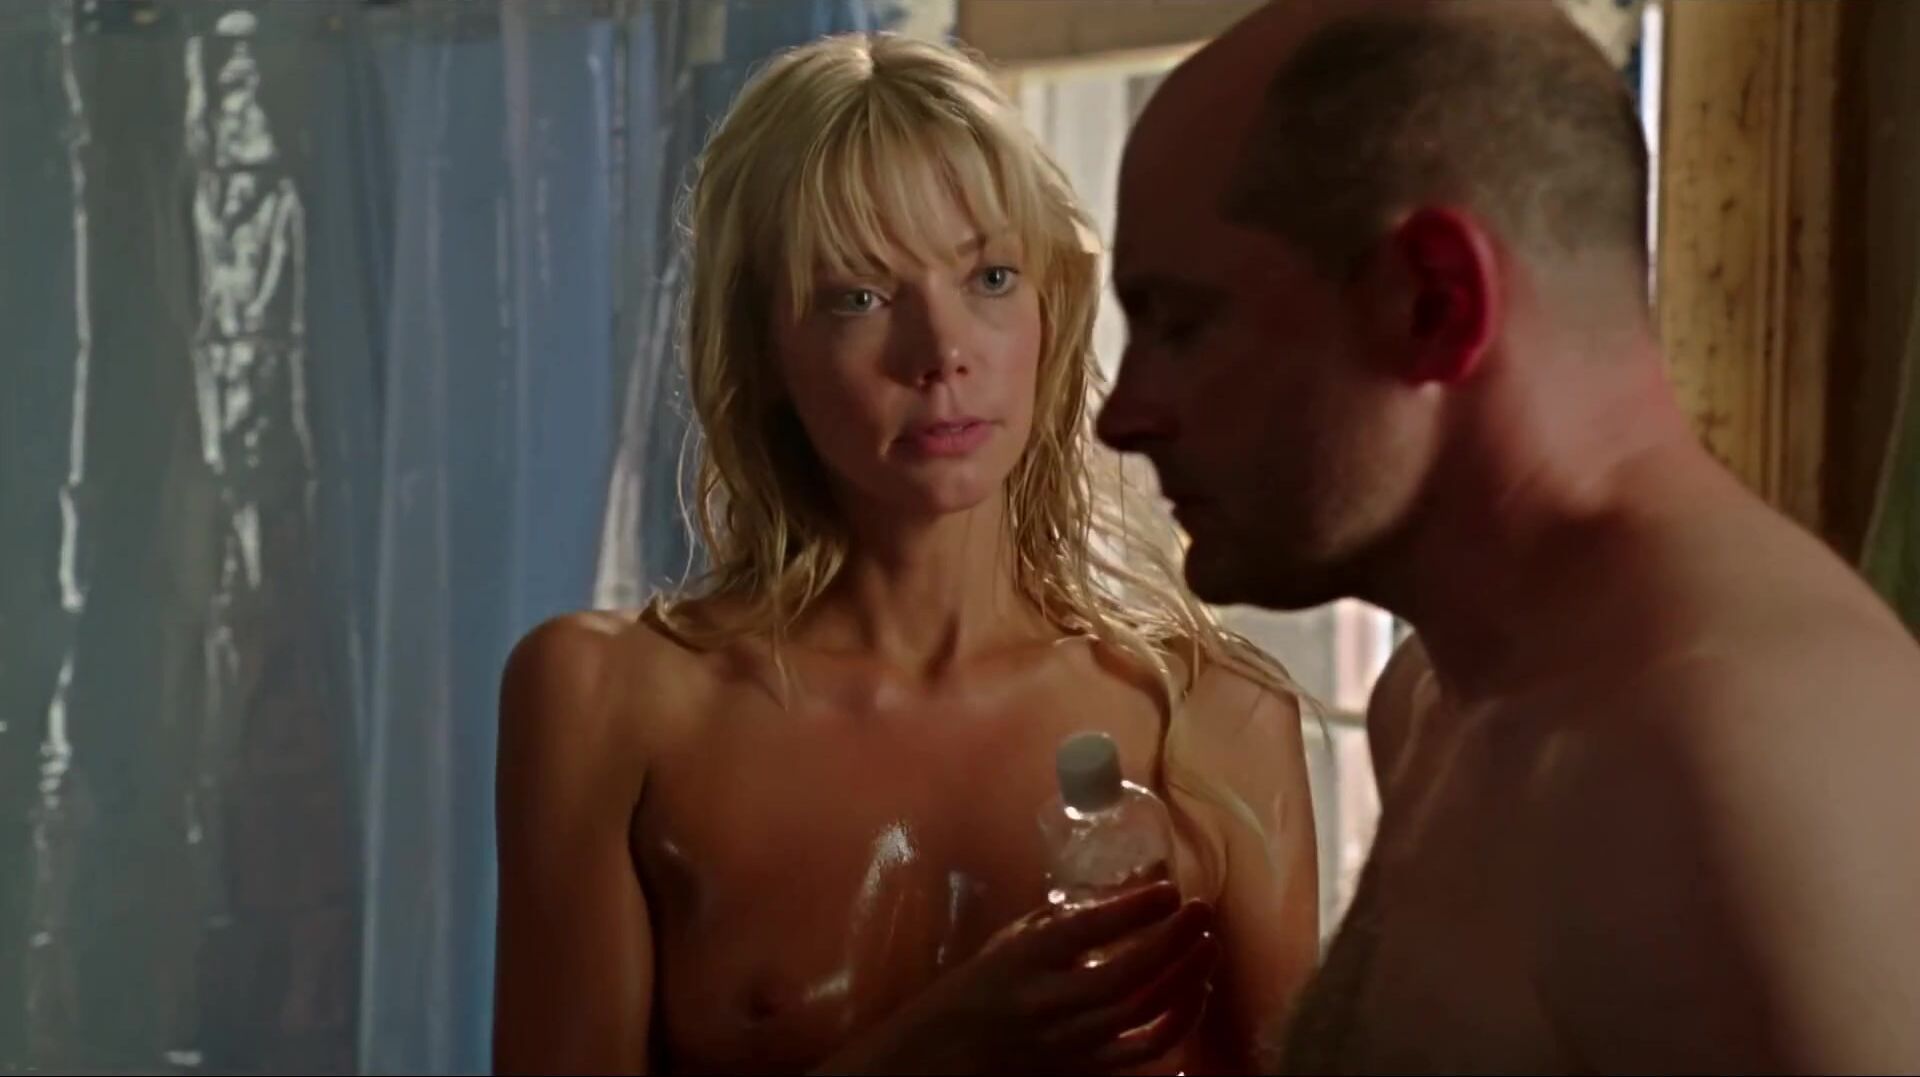 Milf Fuck Bald man is too faithful to be carnal with Riki Lindhome in horror movie Hell Baby (2013) Pawg